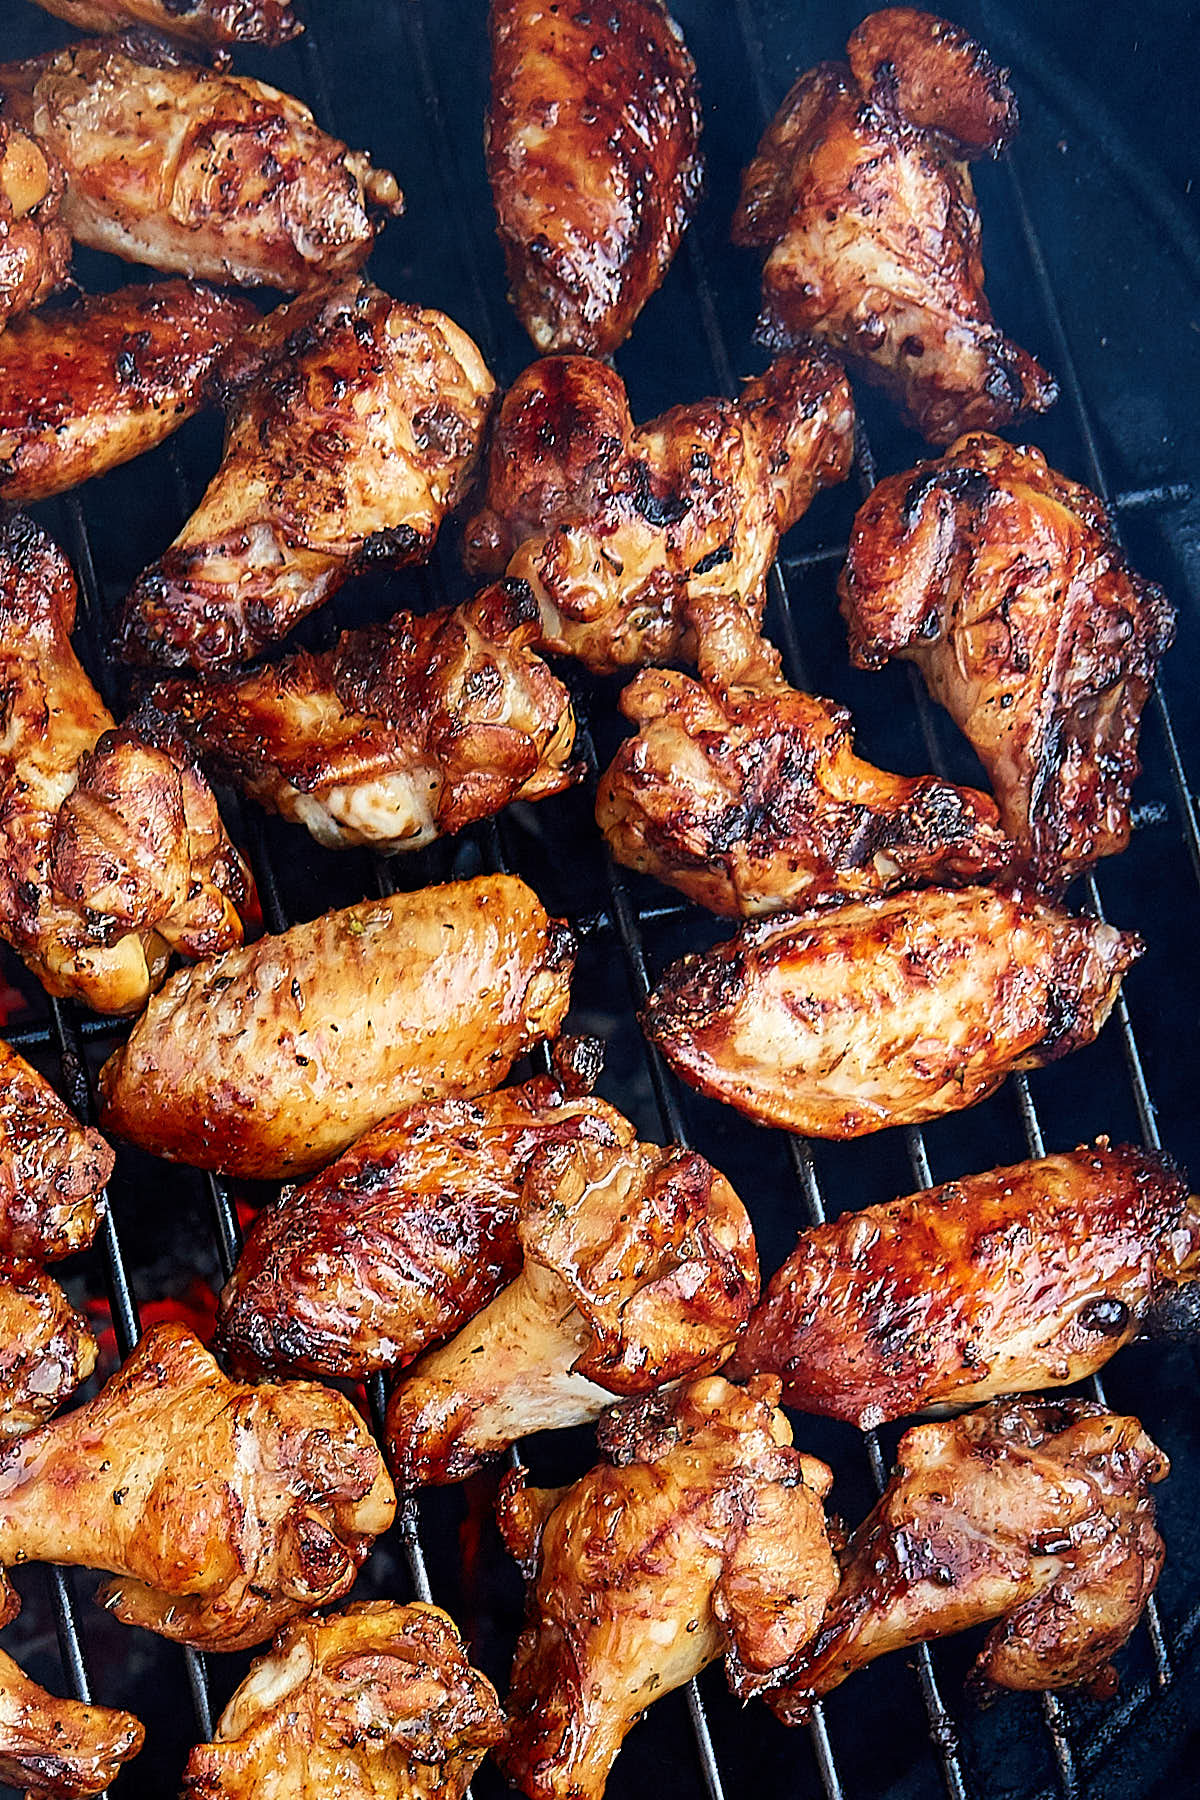 Crispy browned charcoal grilled chicken wings on a rack over hot charcoal.